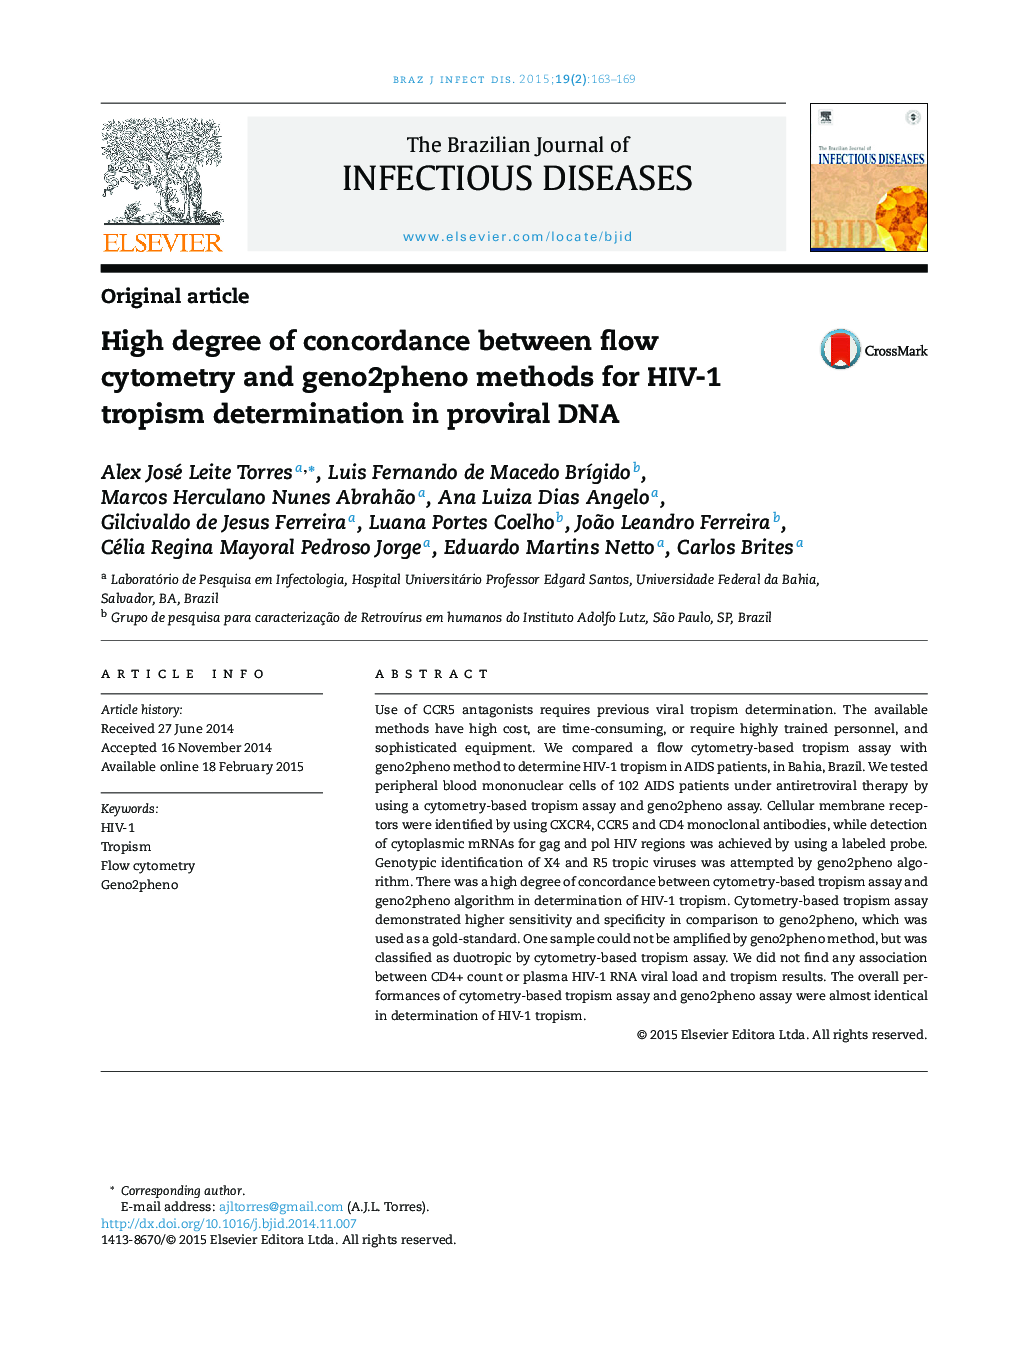 High degree of concordance between flow cytometry and geno2pheno methods for HIV-1 tropism determination in proviral DNA